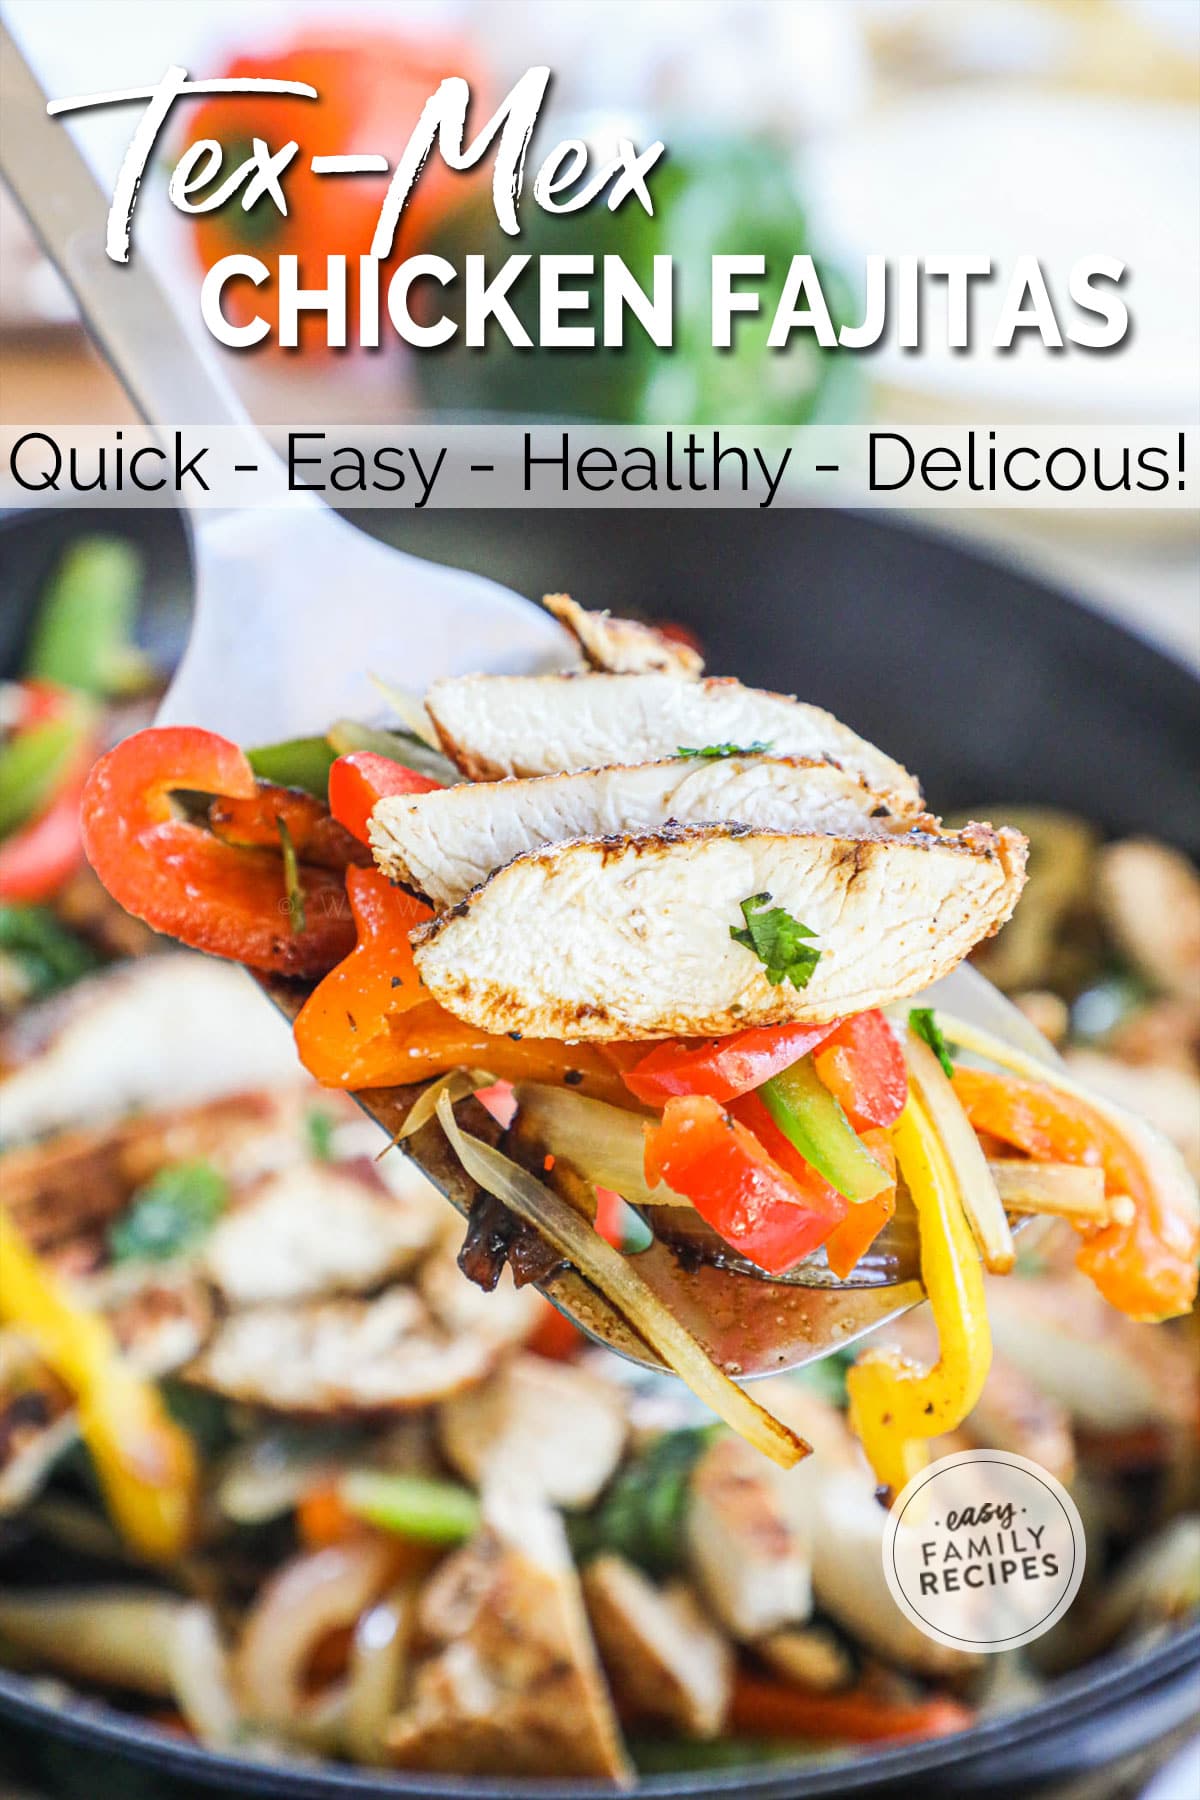 Sliced chicken breast fajitas with onions and bell peppers